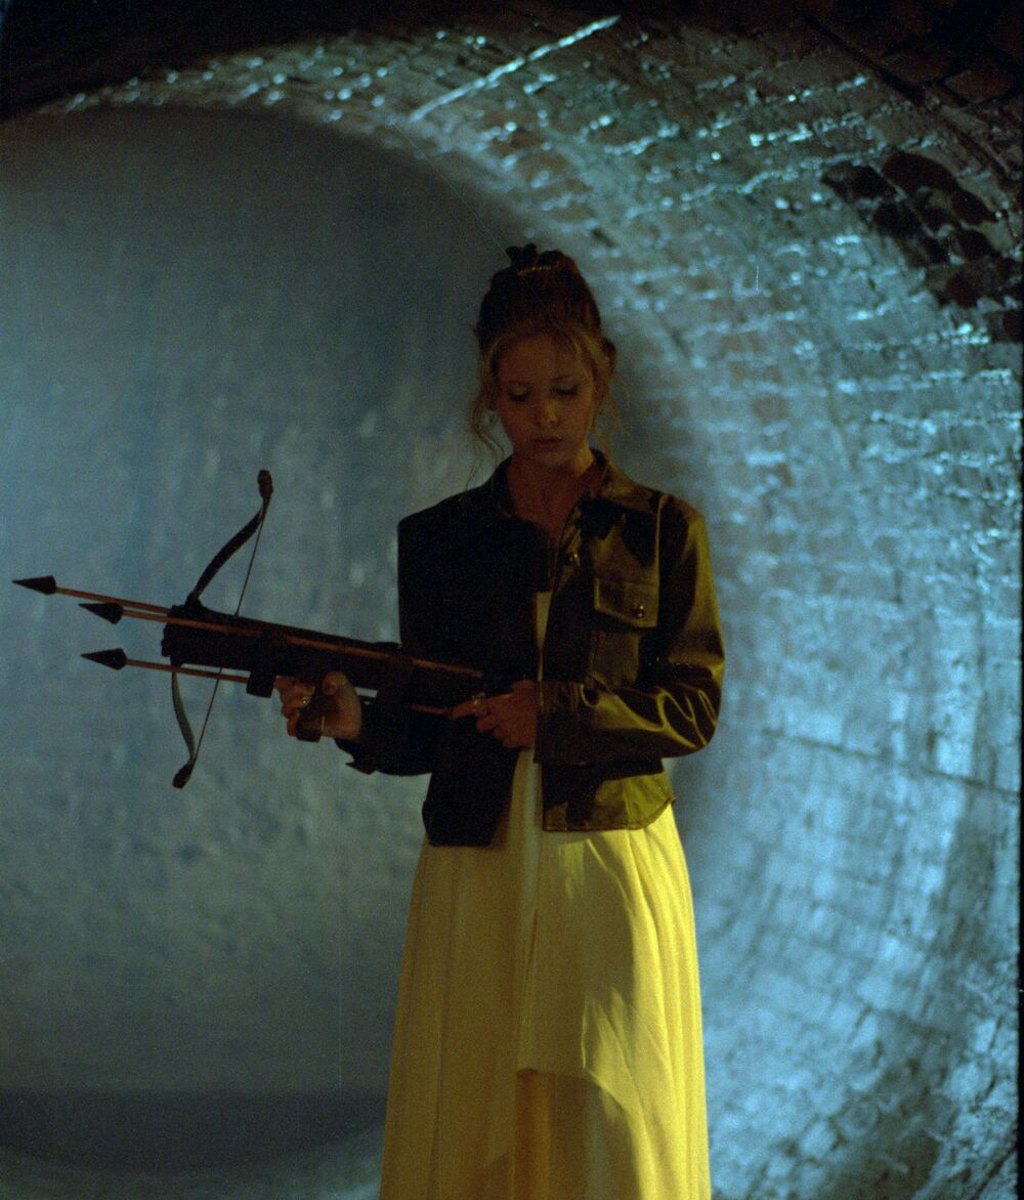 Sarah Michelle as Buffy The Vampire Slayer in a tunnel wearing a yellow dress and a leather jacket, ...